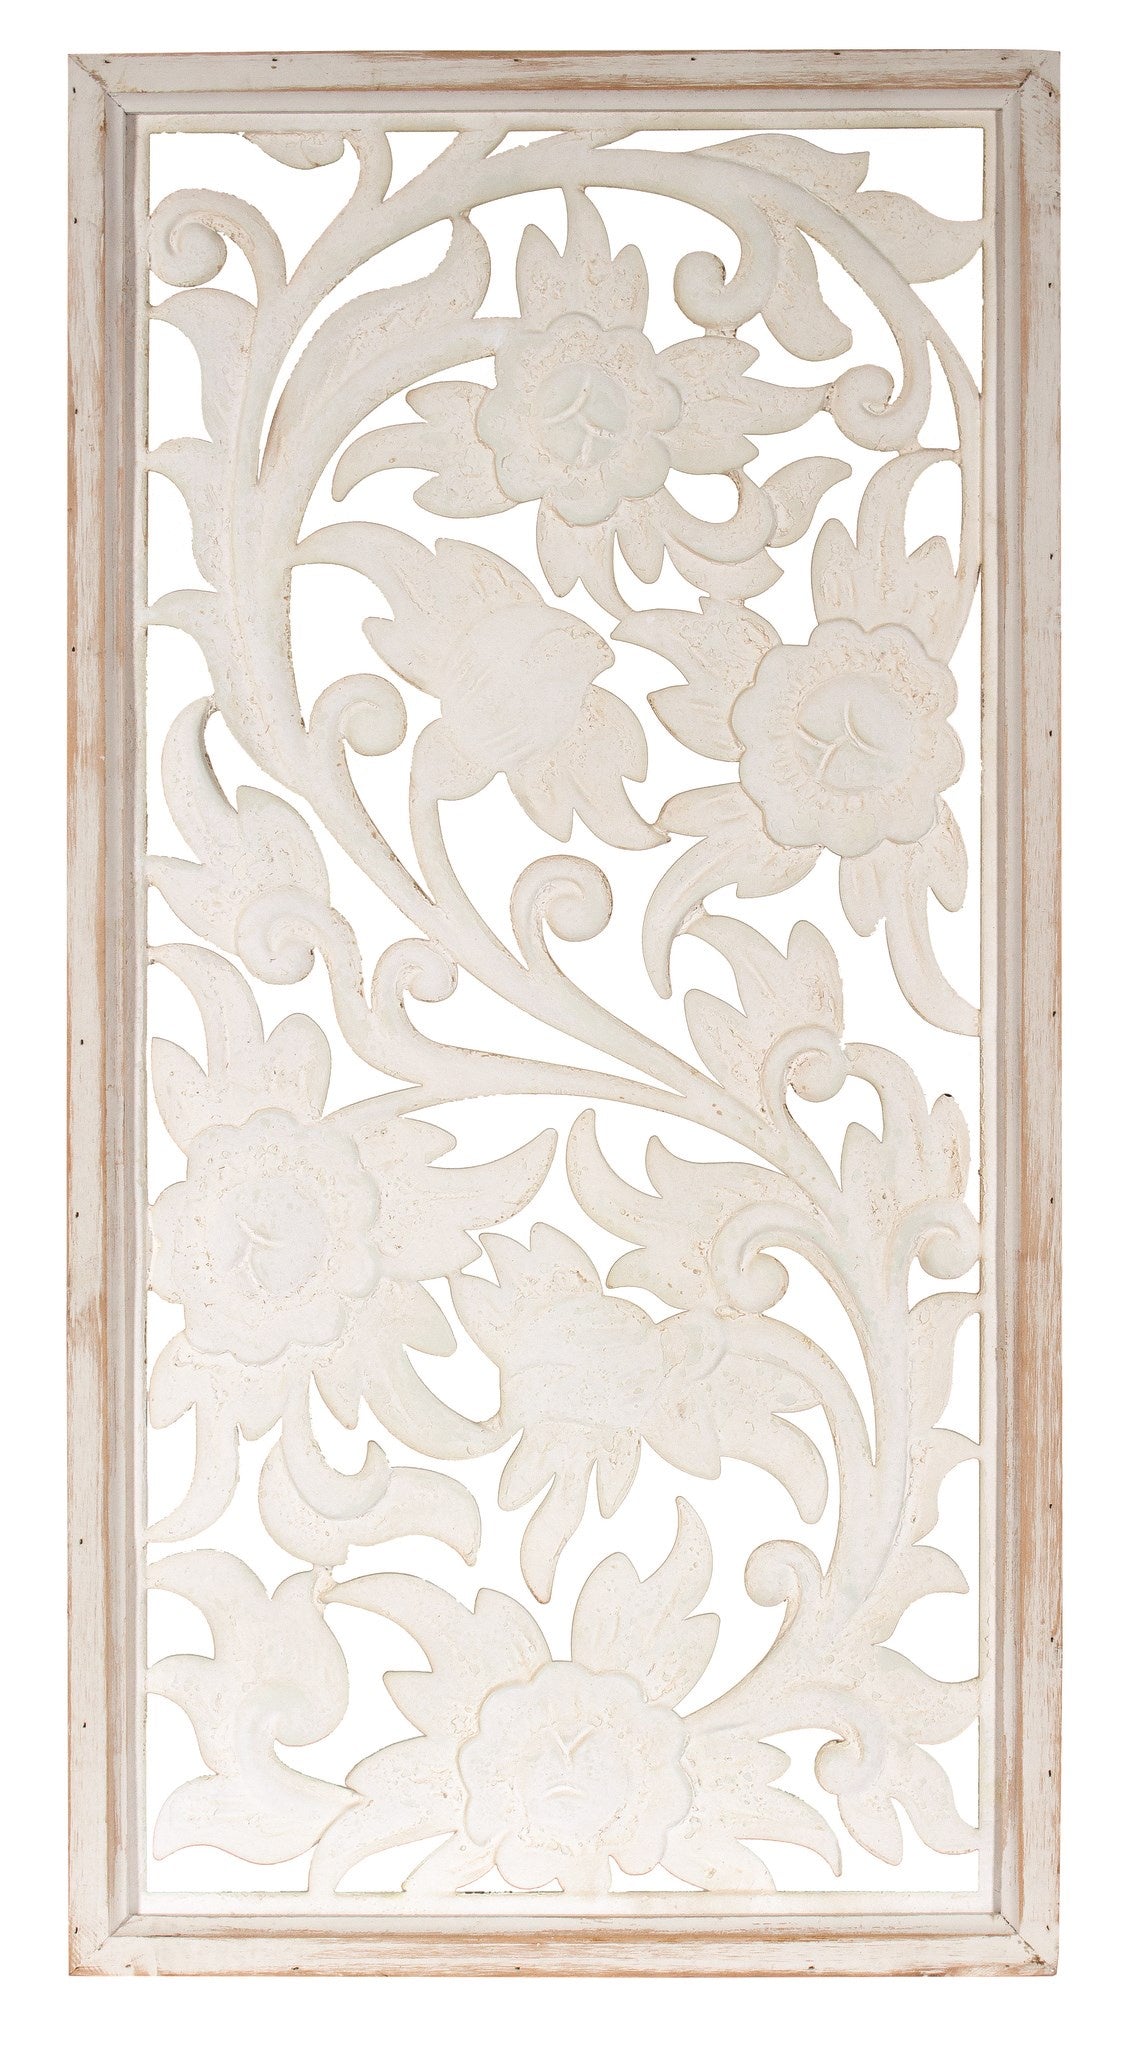 White Carved Wall Art